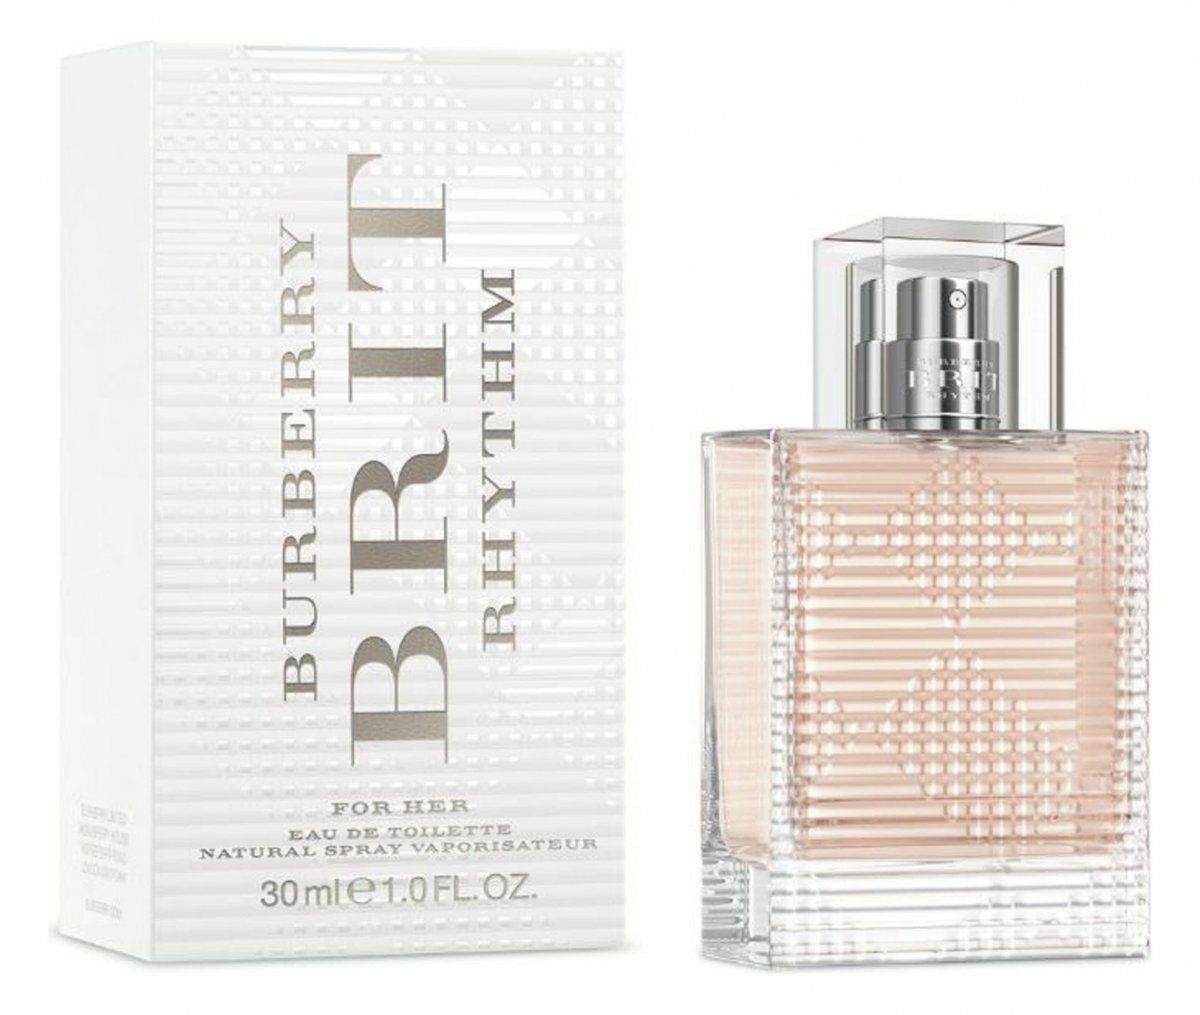 Chip Transformator bagage Brit Rhythm for Her by Burberry (Eau de Toilette) » Reviews & Perfume Facts